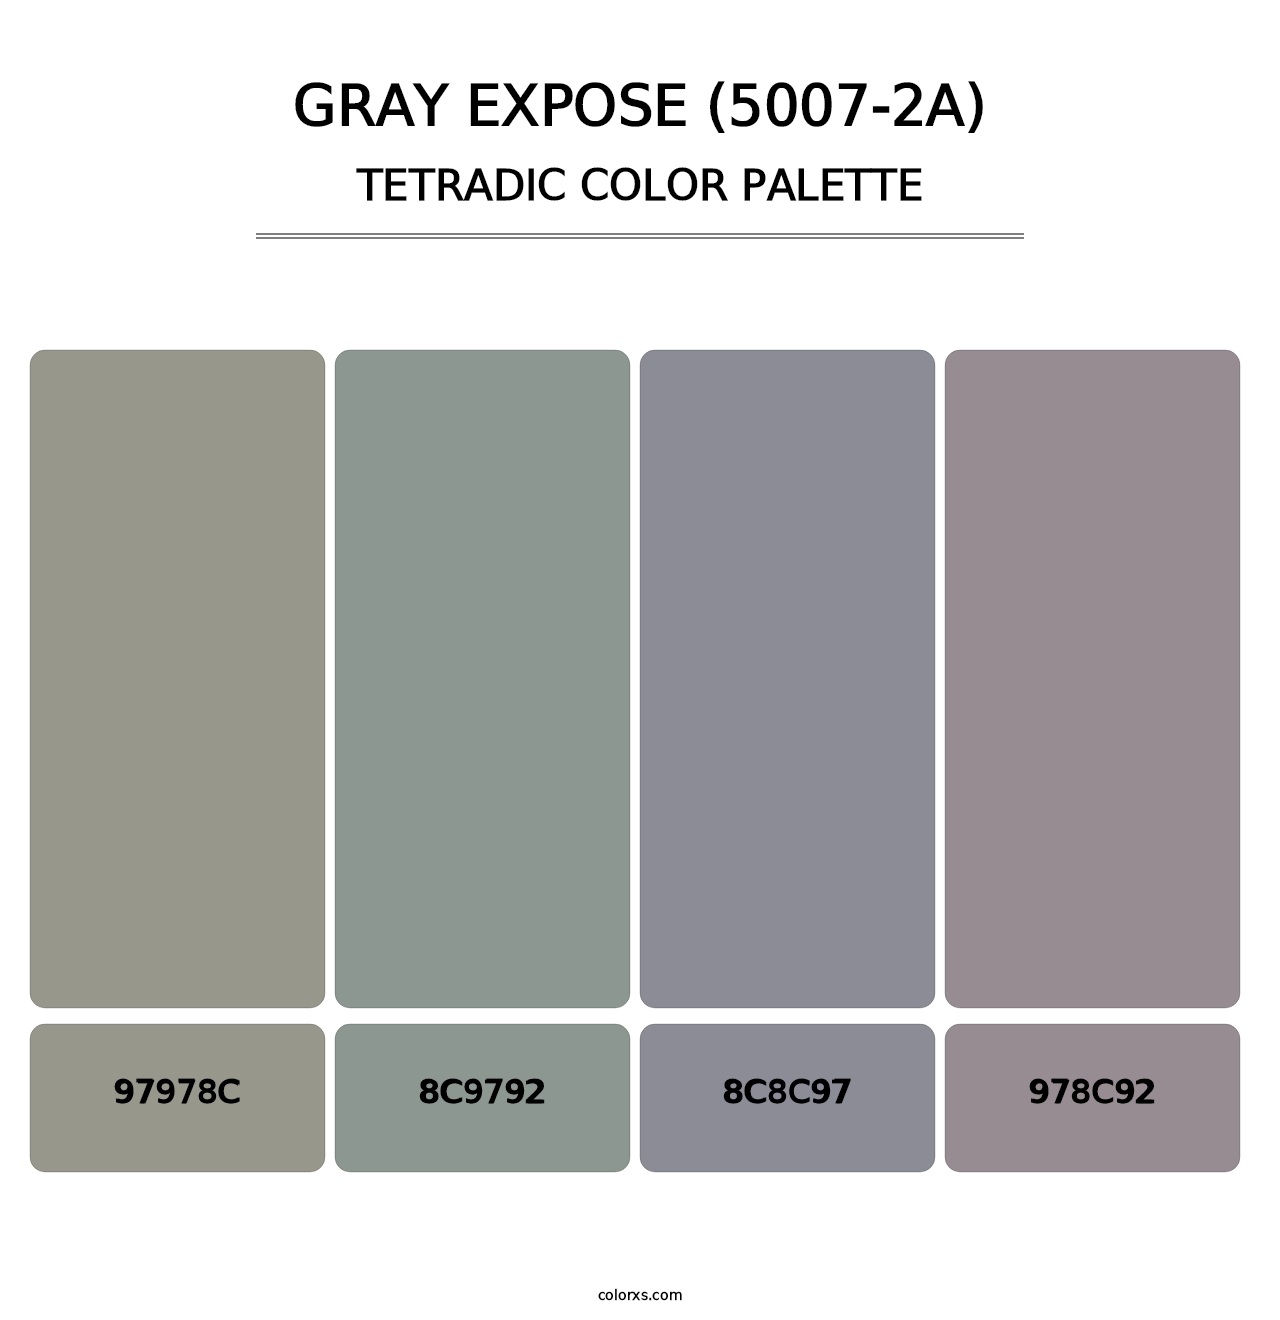 Gray Expose (5007-2A) - Tetradic Color Palette